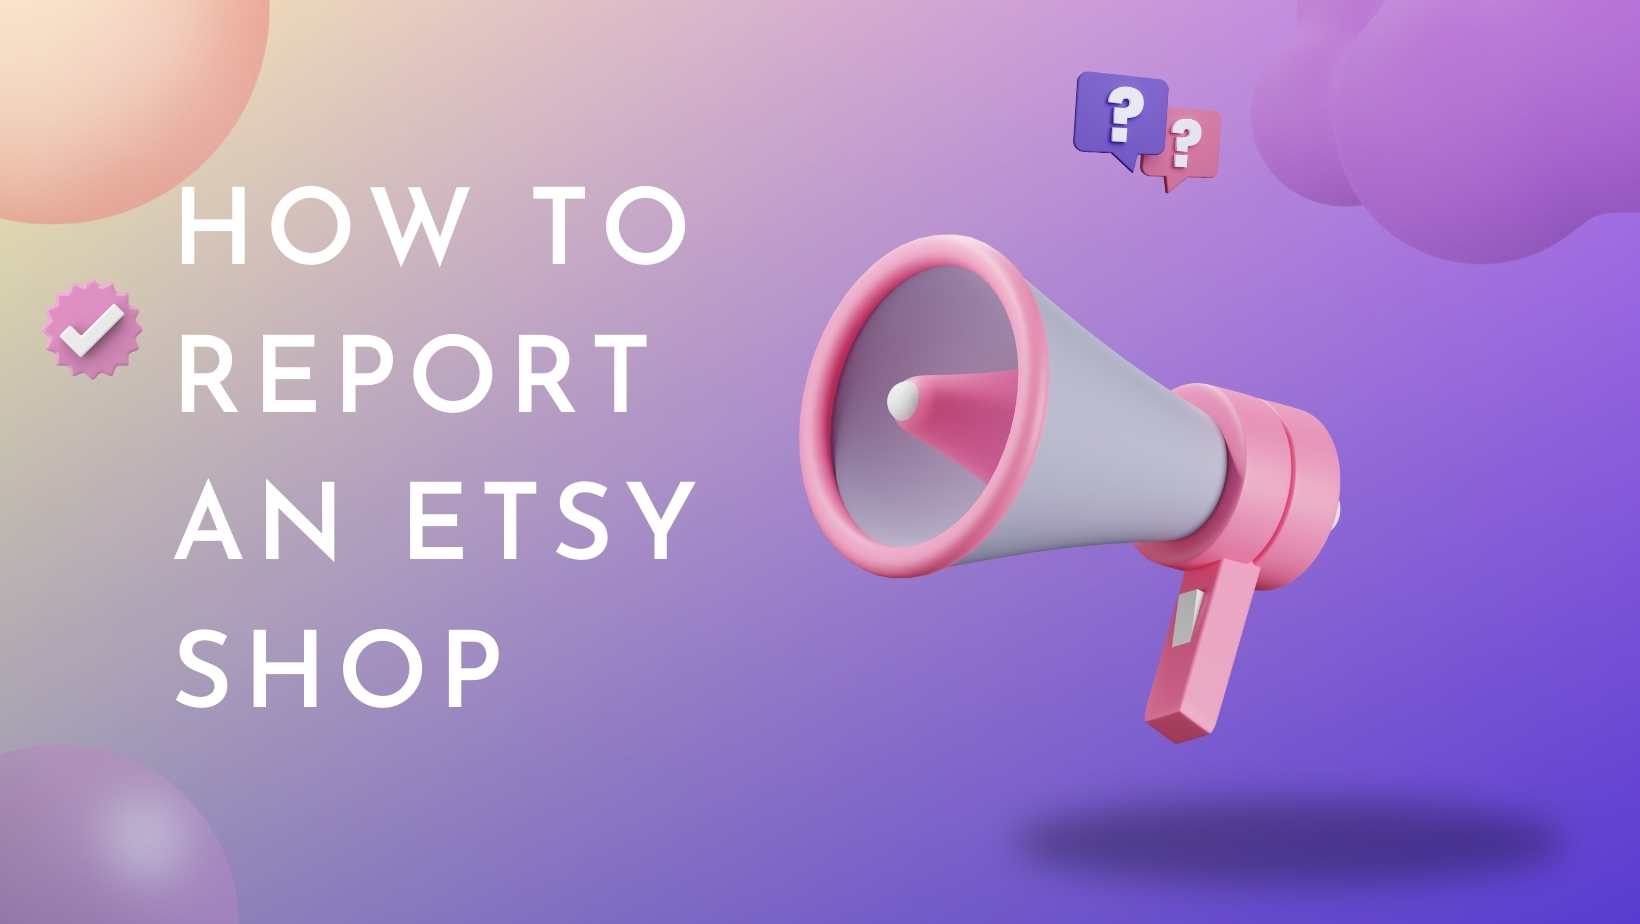 How to Report an Etsy Shop